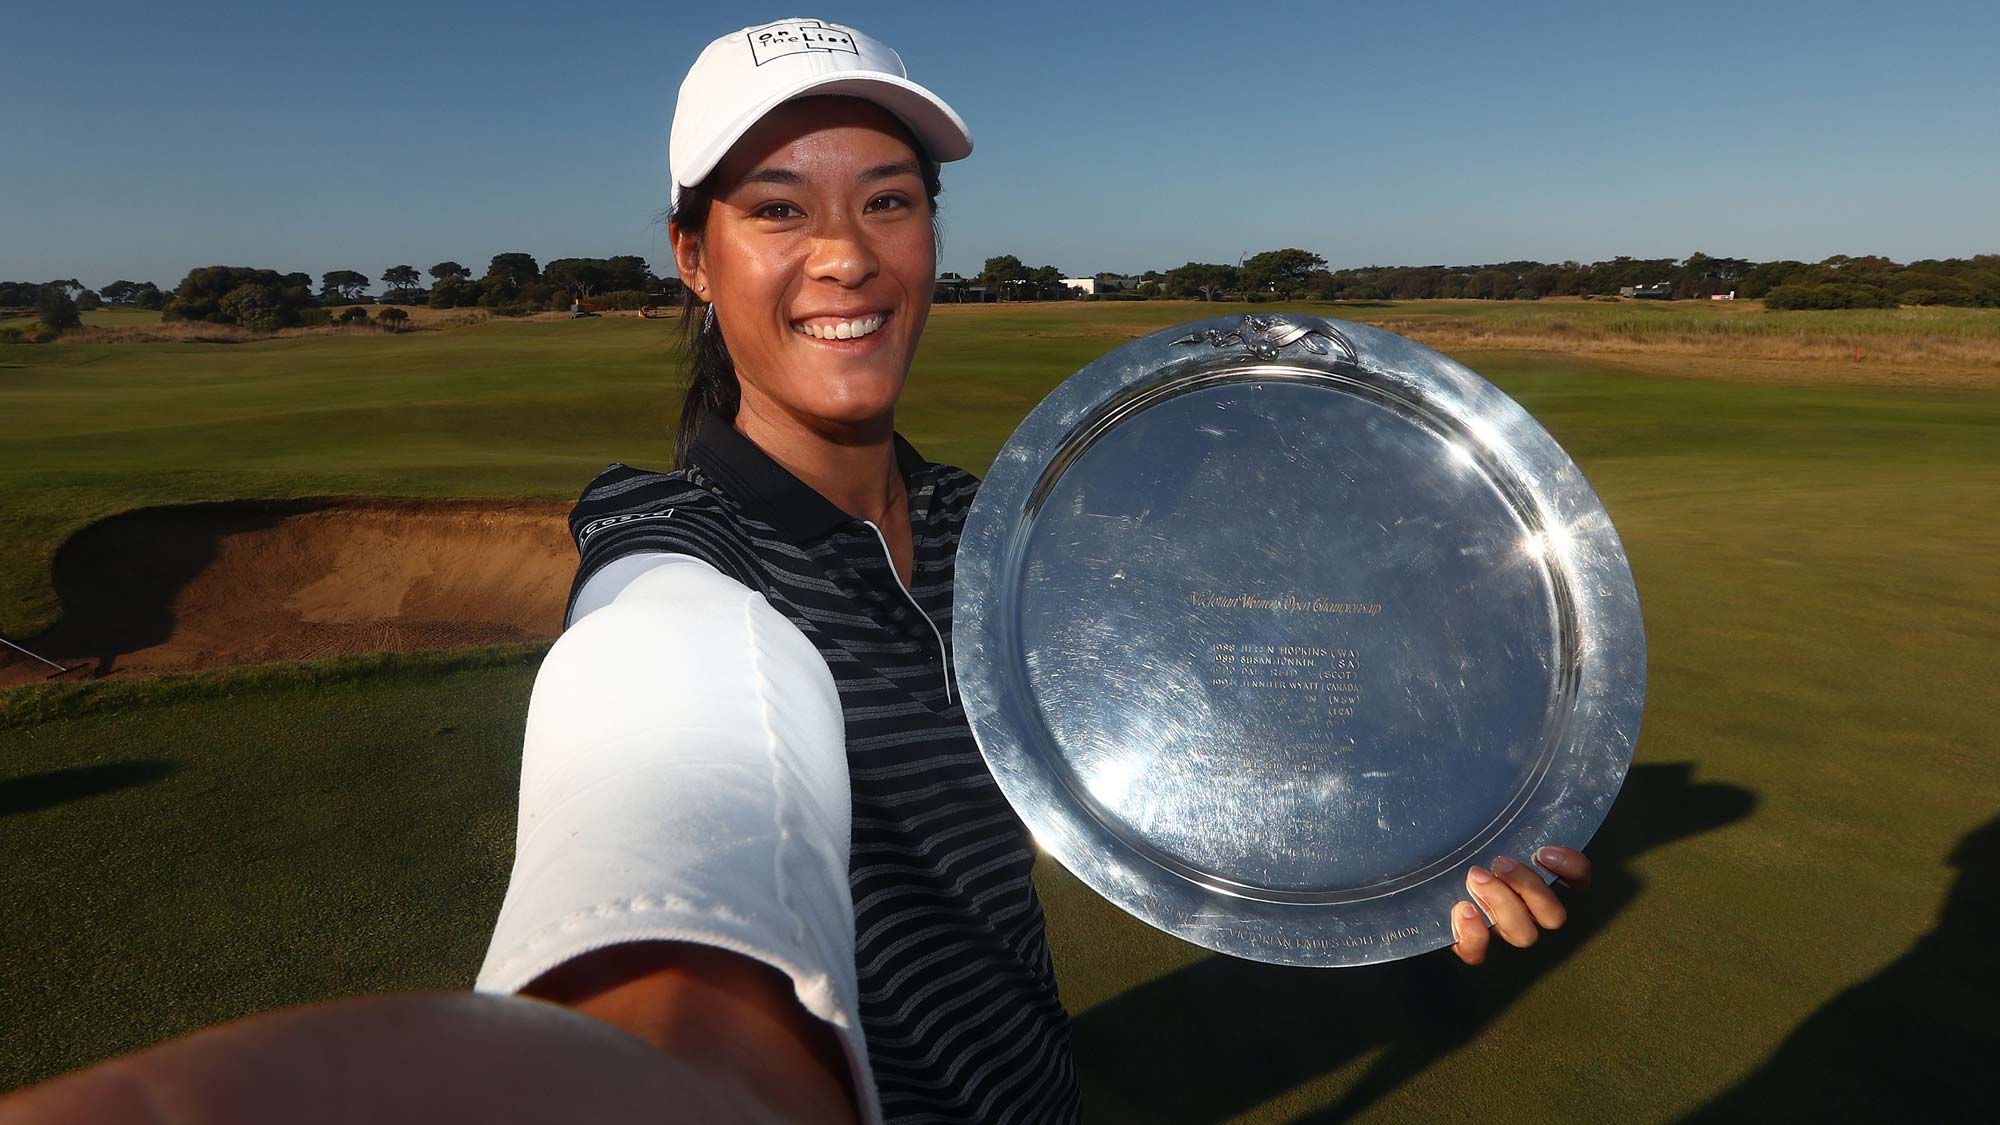 Celine Boutier has her #BagsPacked for the 2020 Diamond Resorts Tournament of Champions presented by IOA after her victory at the ISPS Handa Vic Open